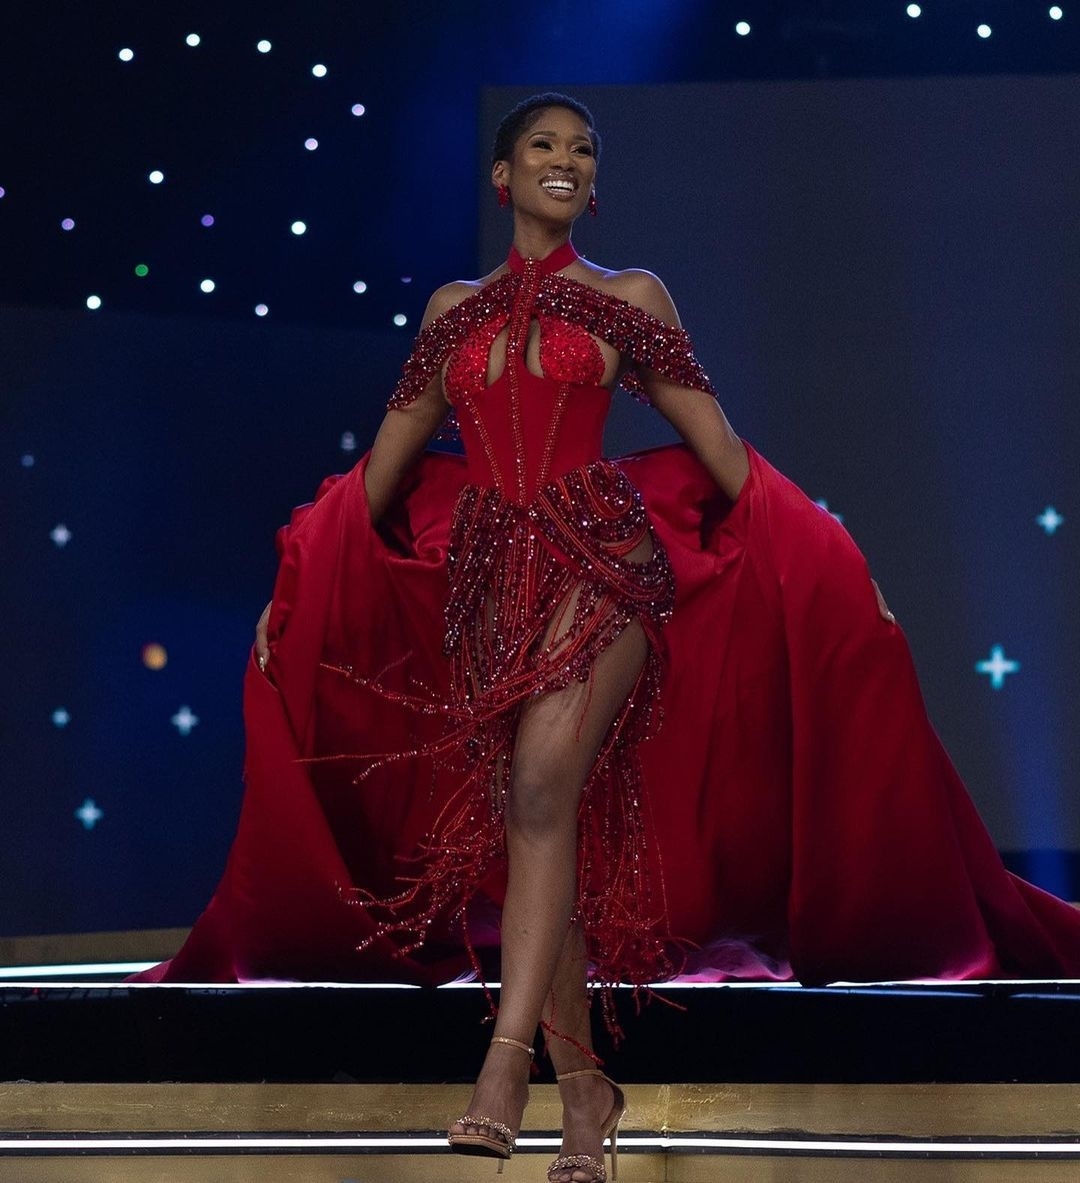 The beautiful Nande Mabala graced the stage in Gert-Johan Coetzee Couture 👑 #MissSA2023 @Official_MissSA #gertjohancoetzee